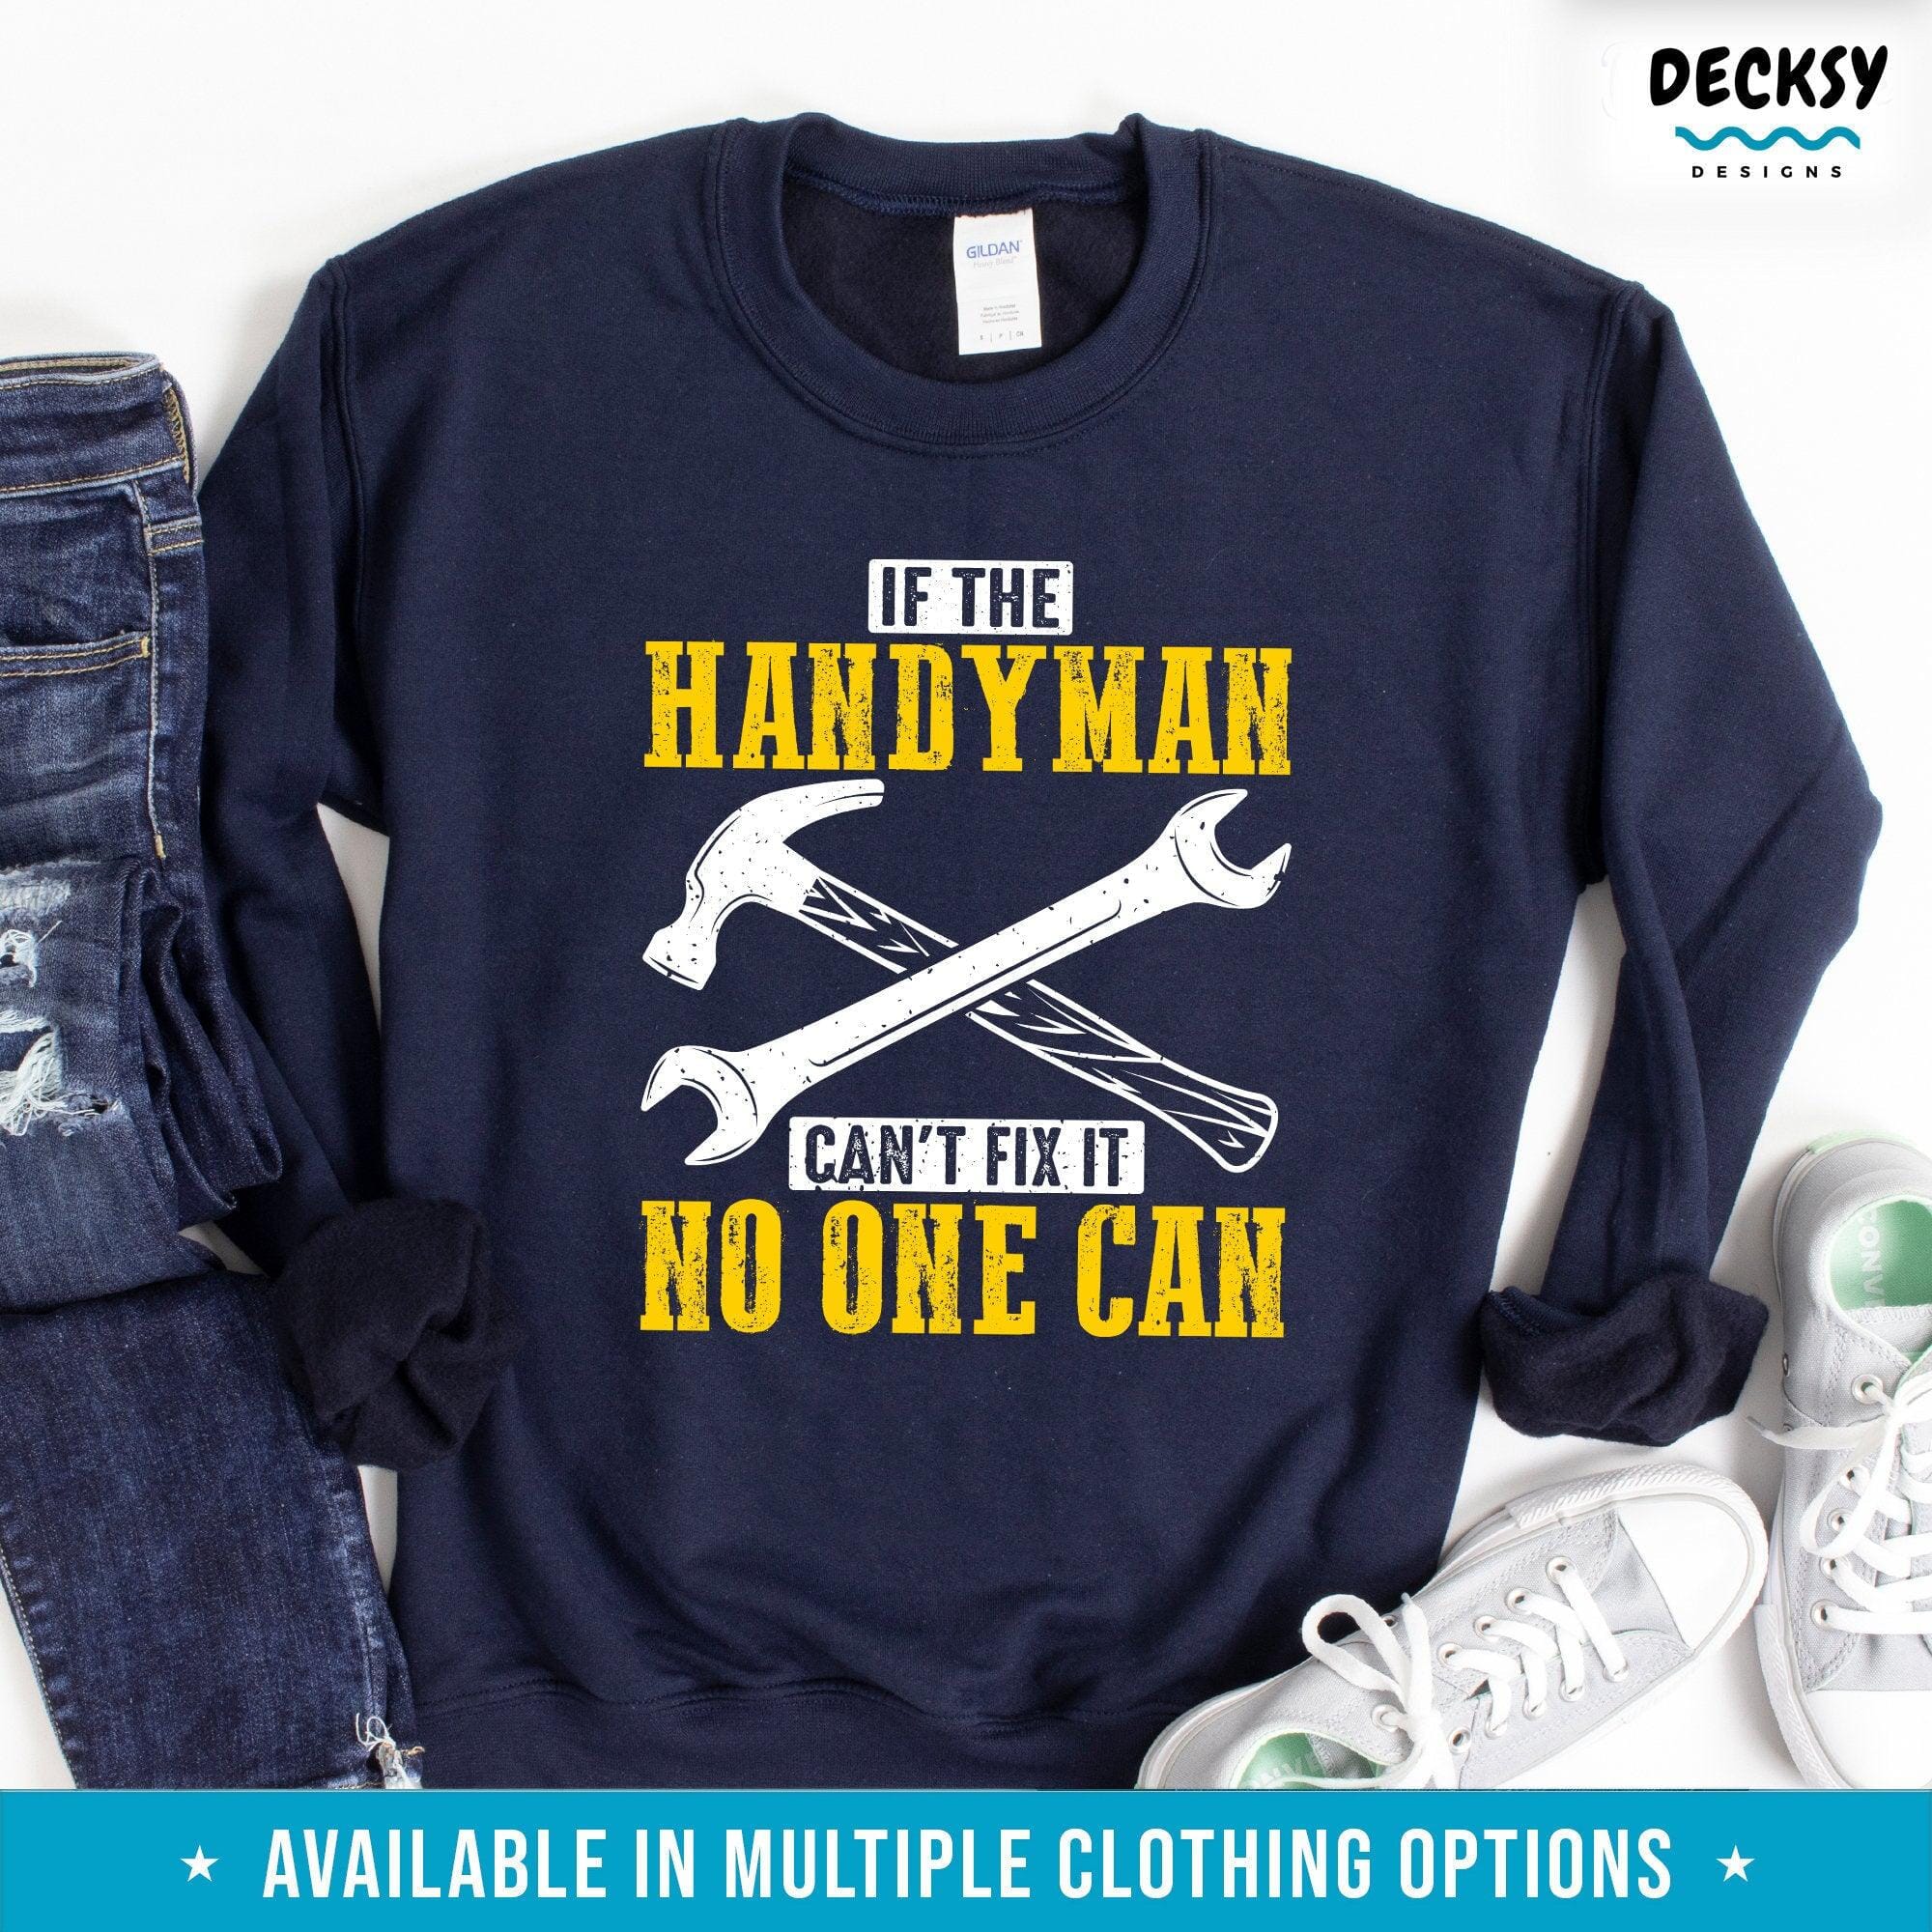 Handyman Shirt, Gift For Repairman-Clothing:Gender-Neutral Adult Clothing:Tops & Tees:T-shirts:Graphic Tees-DecksyDesigns